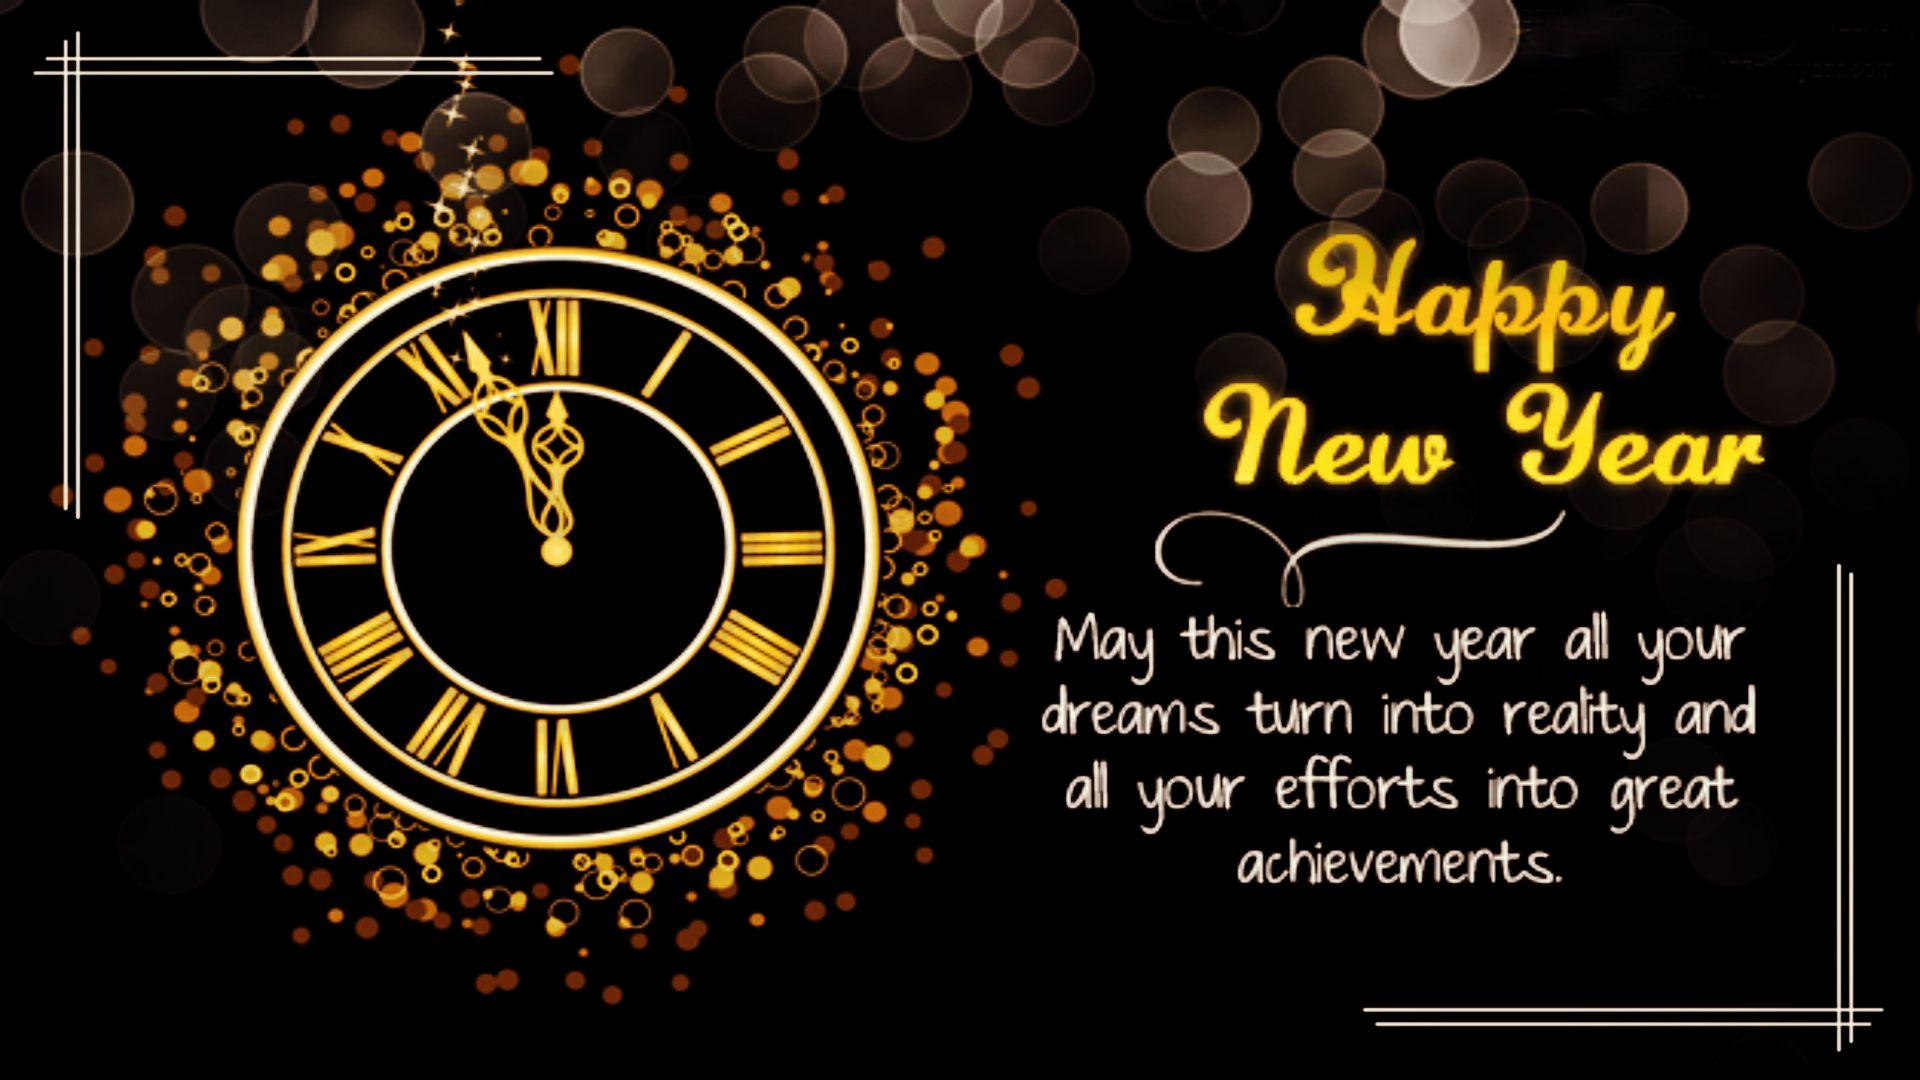 happy-new-year-text-picture-sms4.jpg